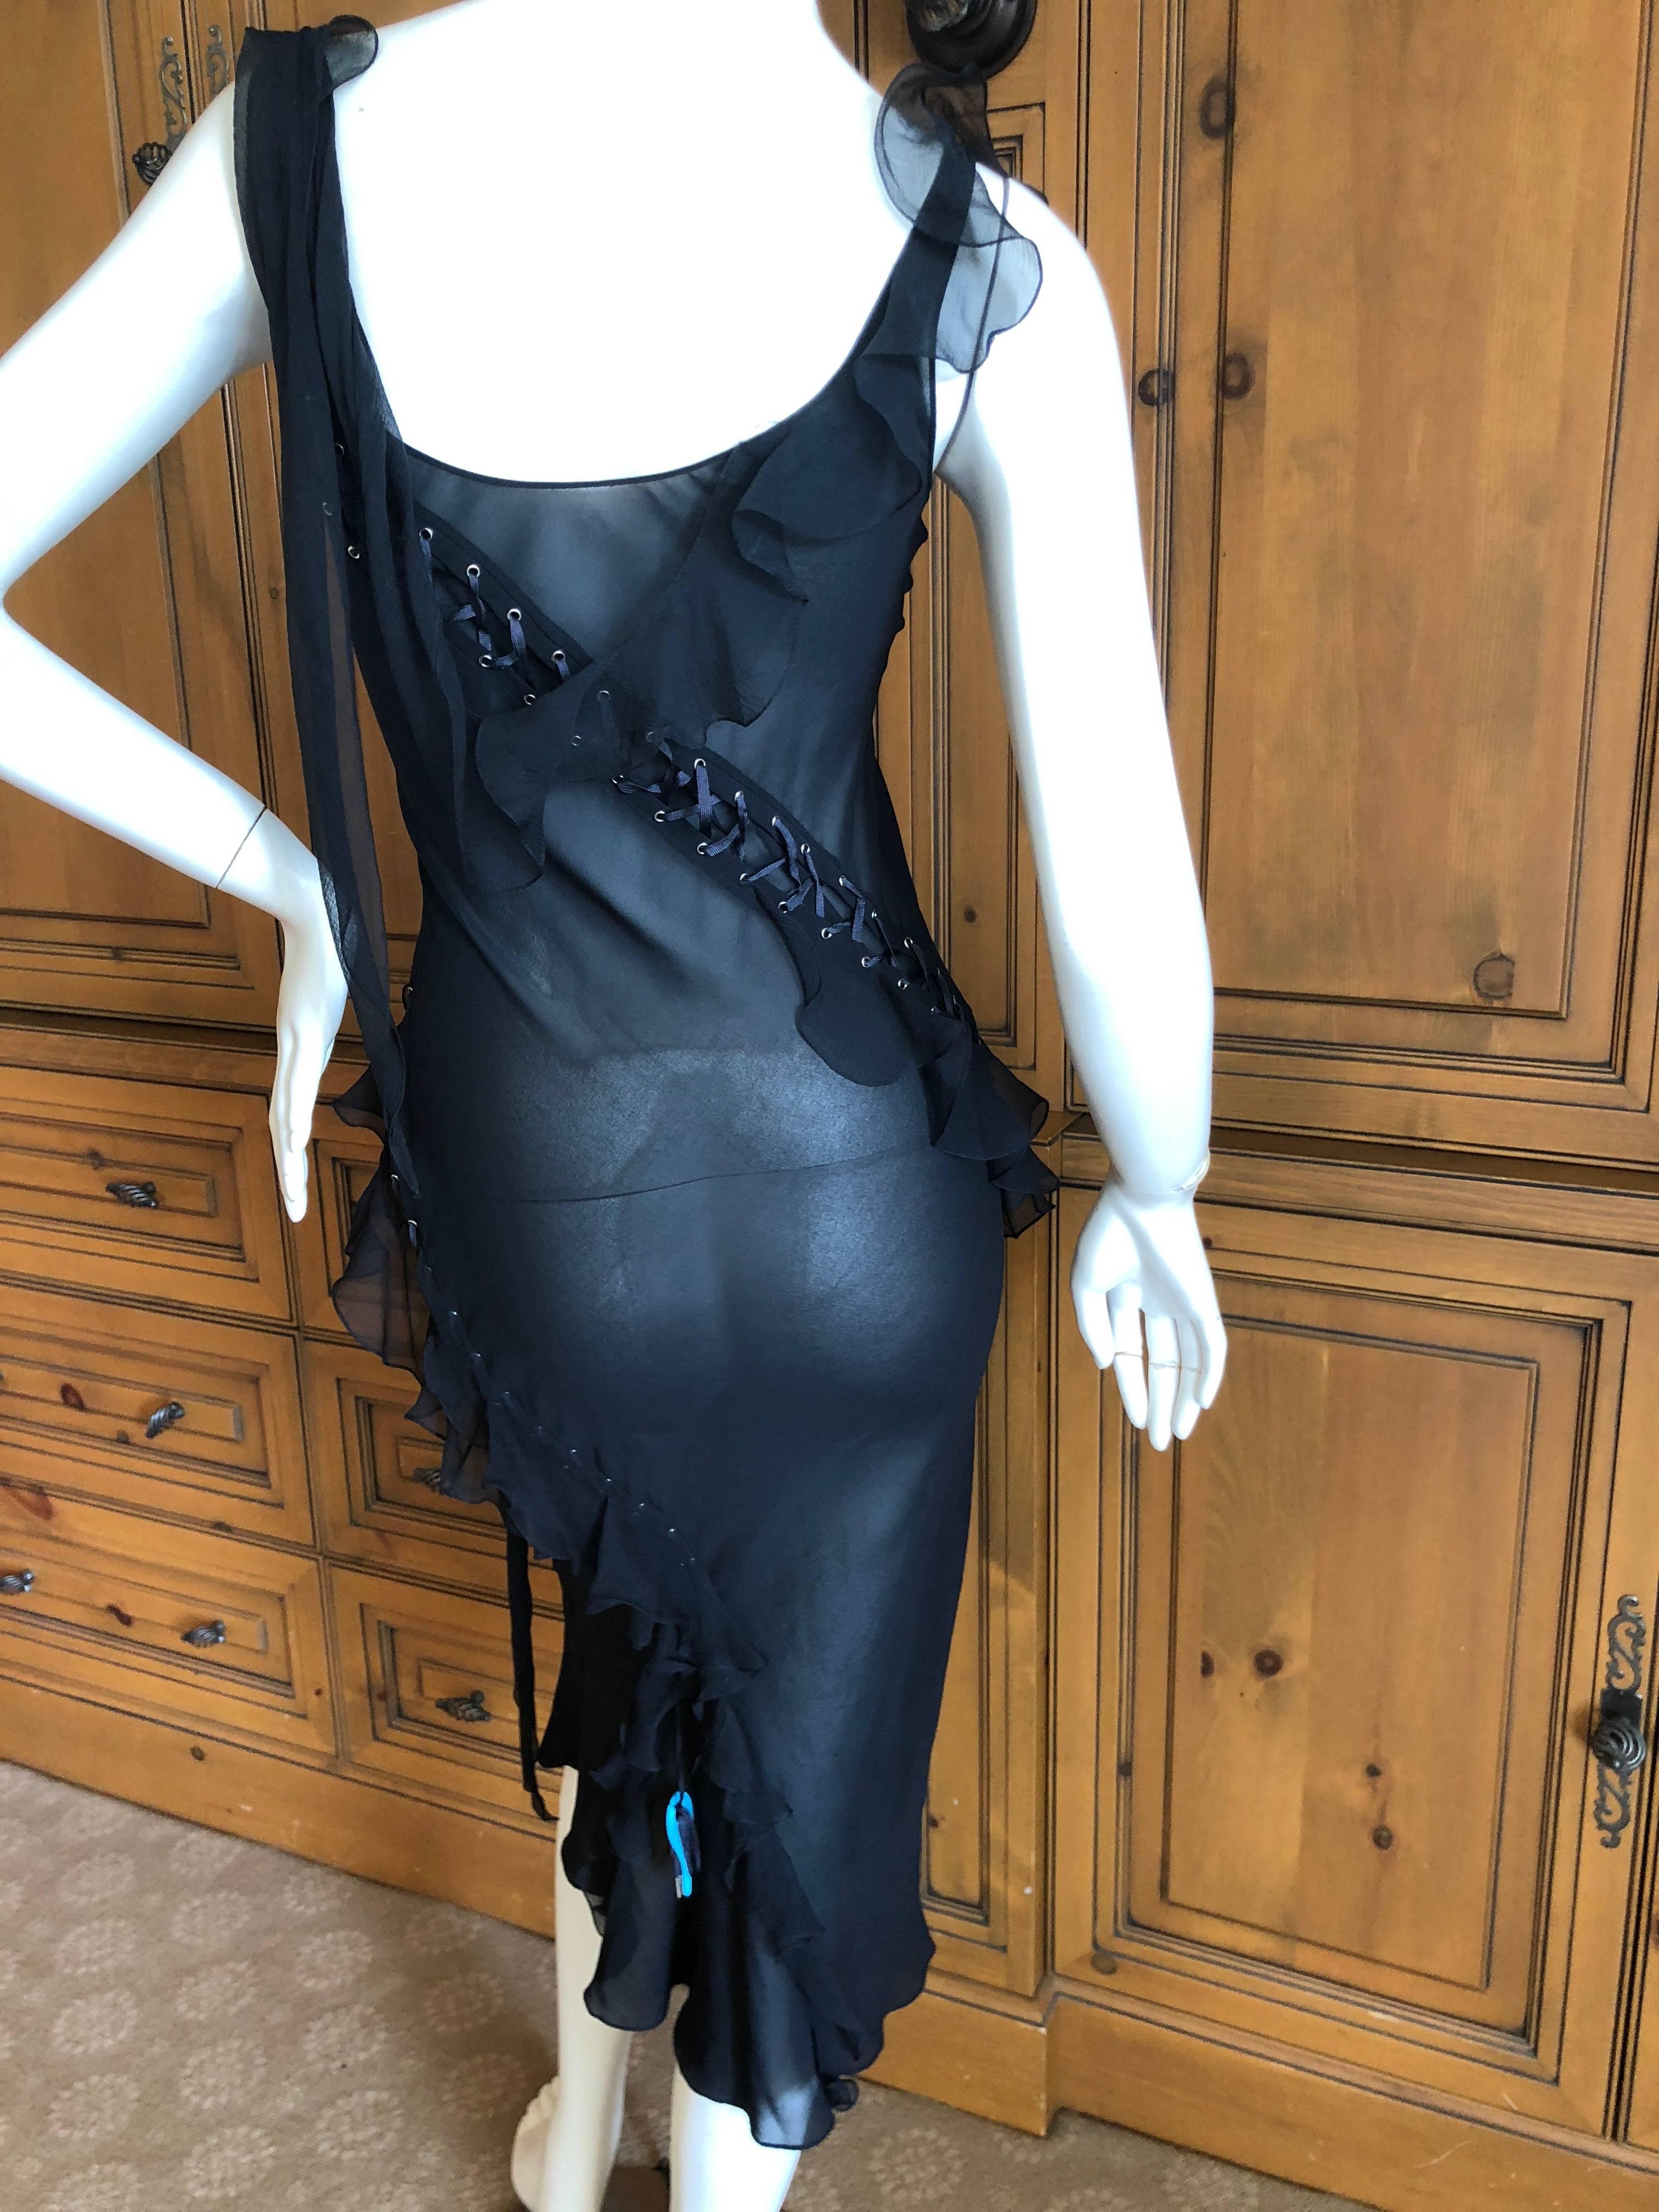 Christian Dior by John Galliano Vintage Sheer Black Dress Corset Lace Up Details 4